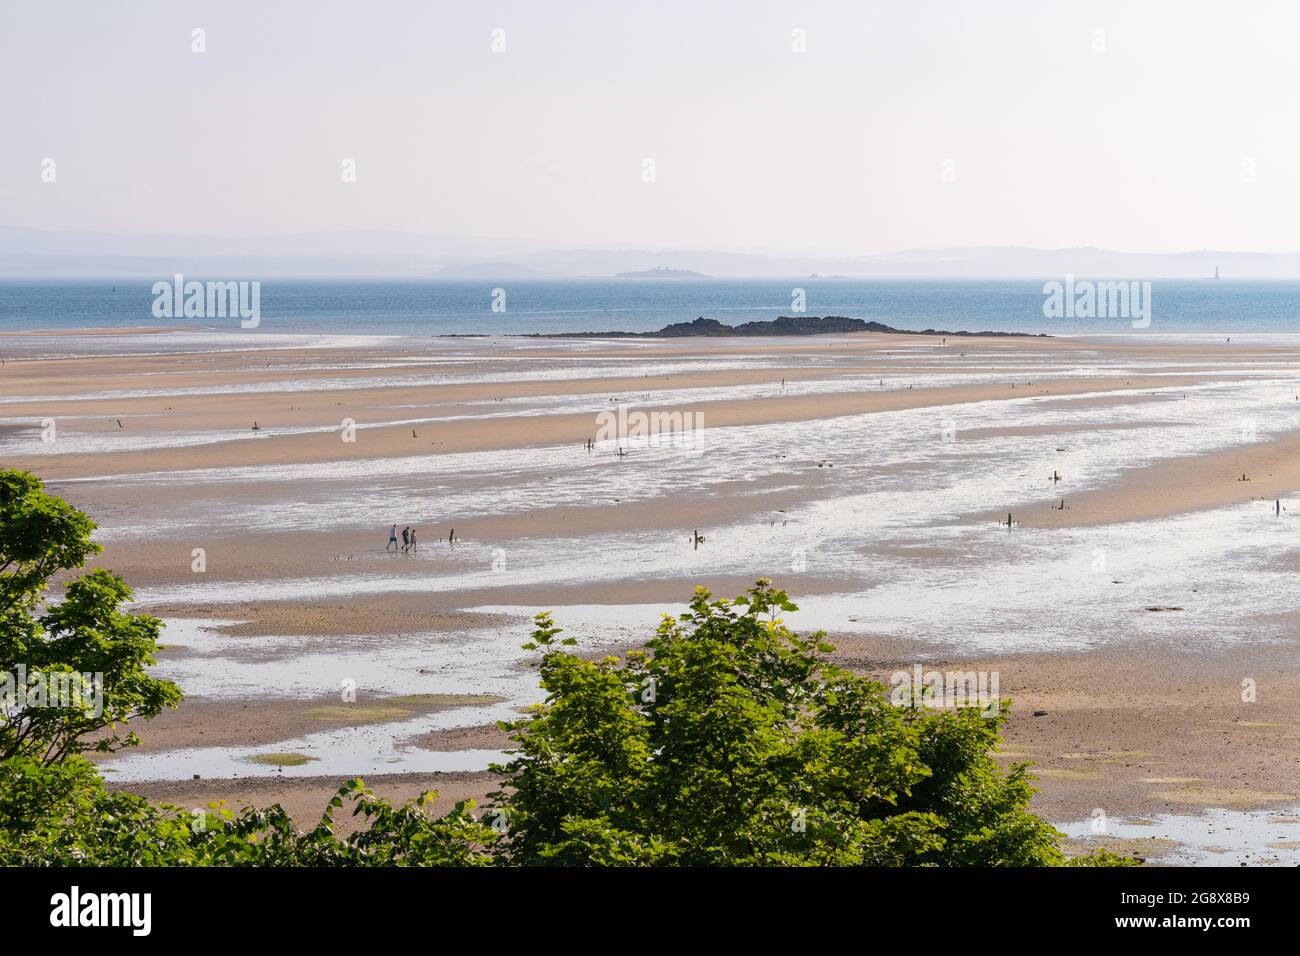 The Black Rock rocky islet between Burntisland and Kinghorn, Pettycur Bay, Firth of Forth, Fife, Scotland, UK at low tide Stock Photo